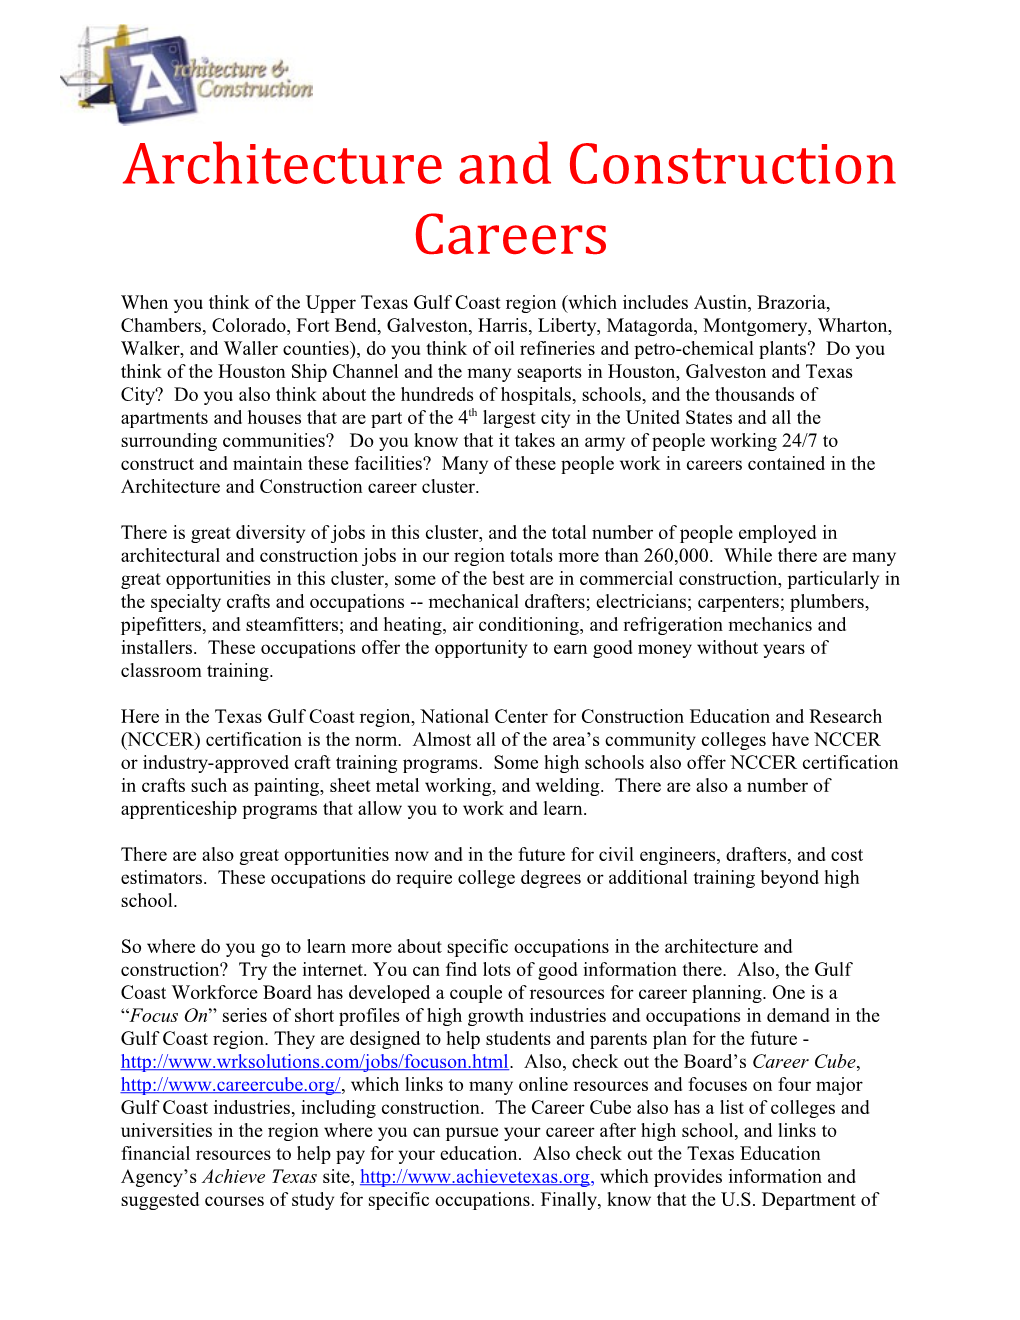 Architecture and Construction Careers